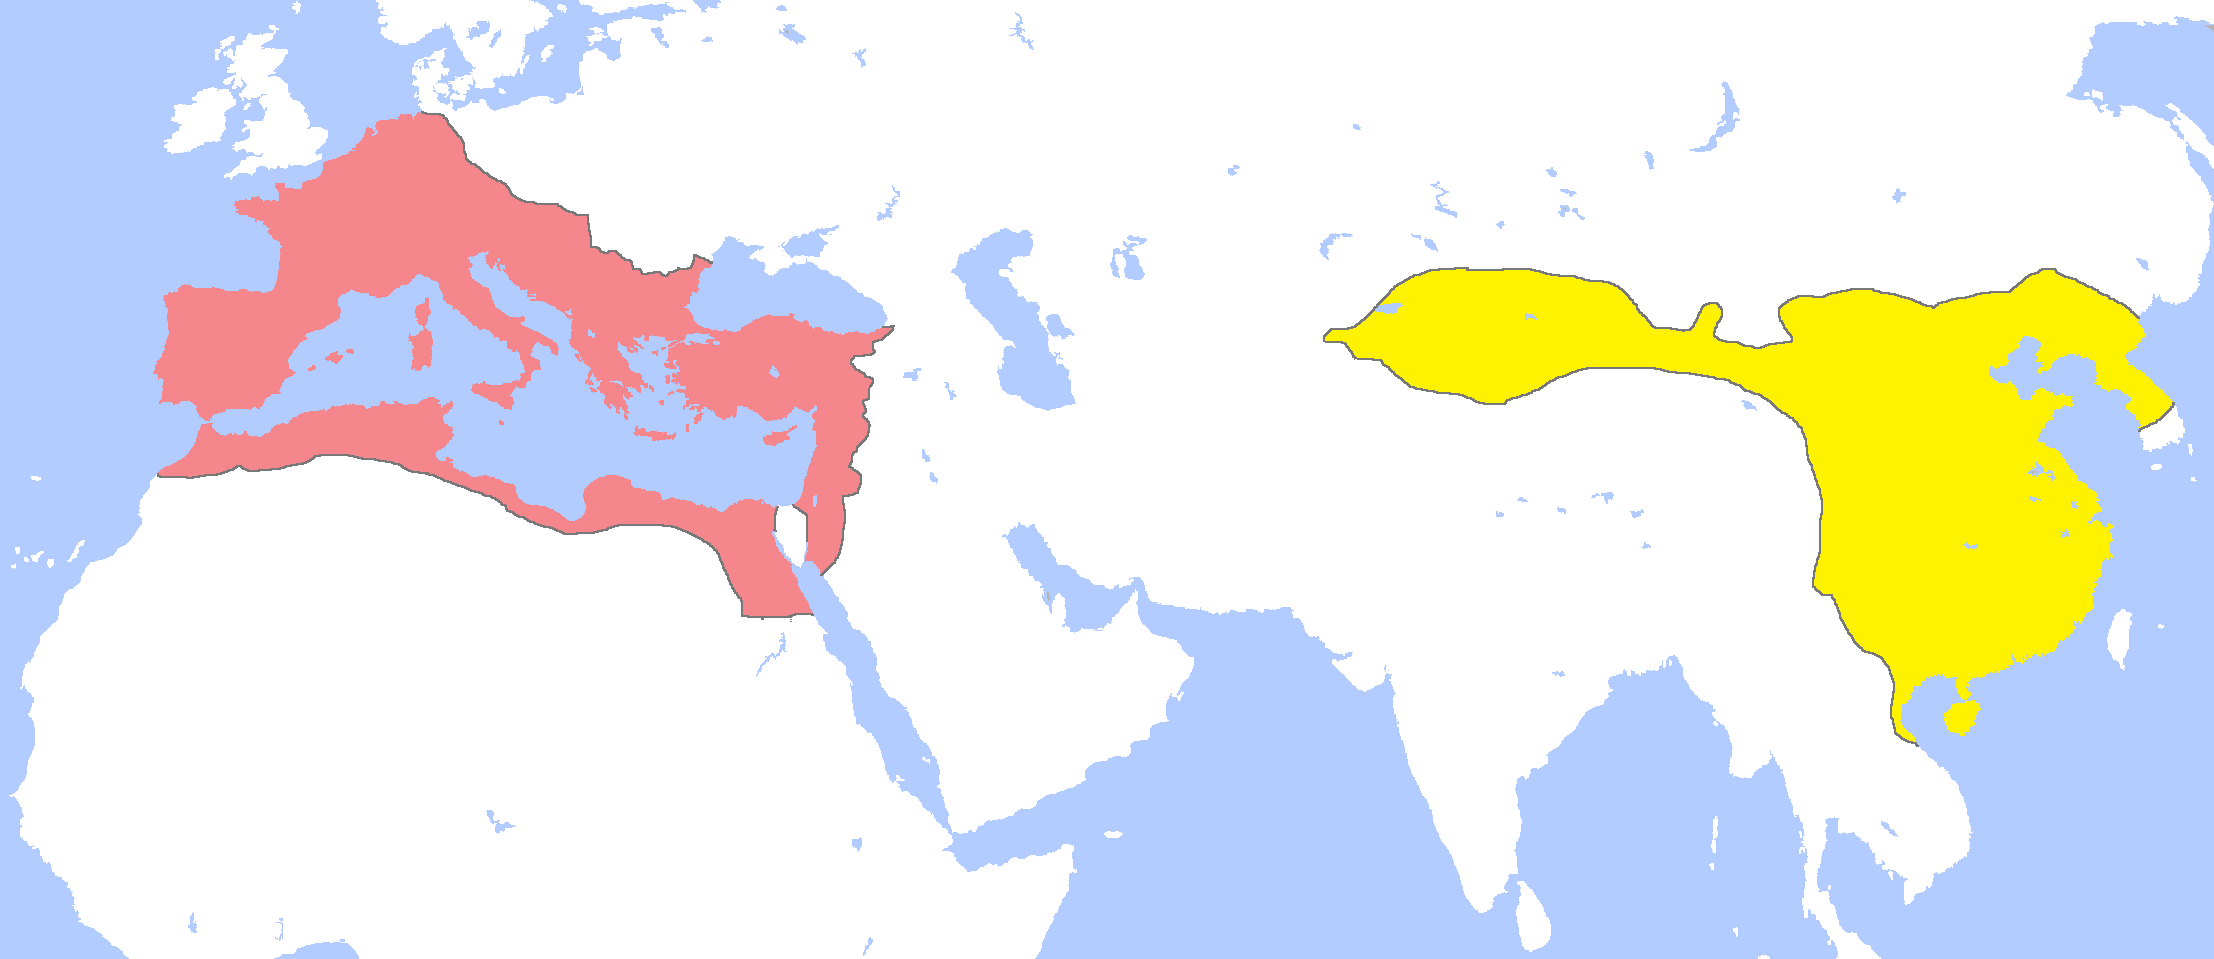 Map of Roman and Han Empires